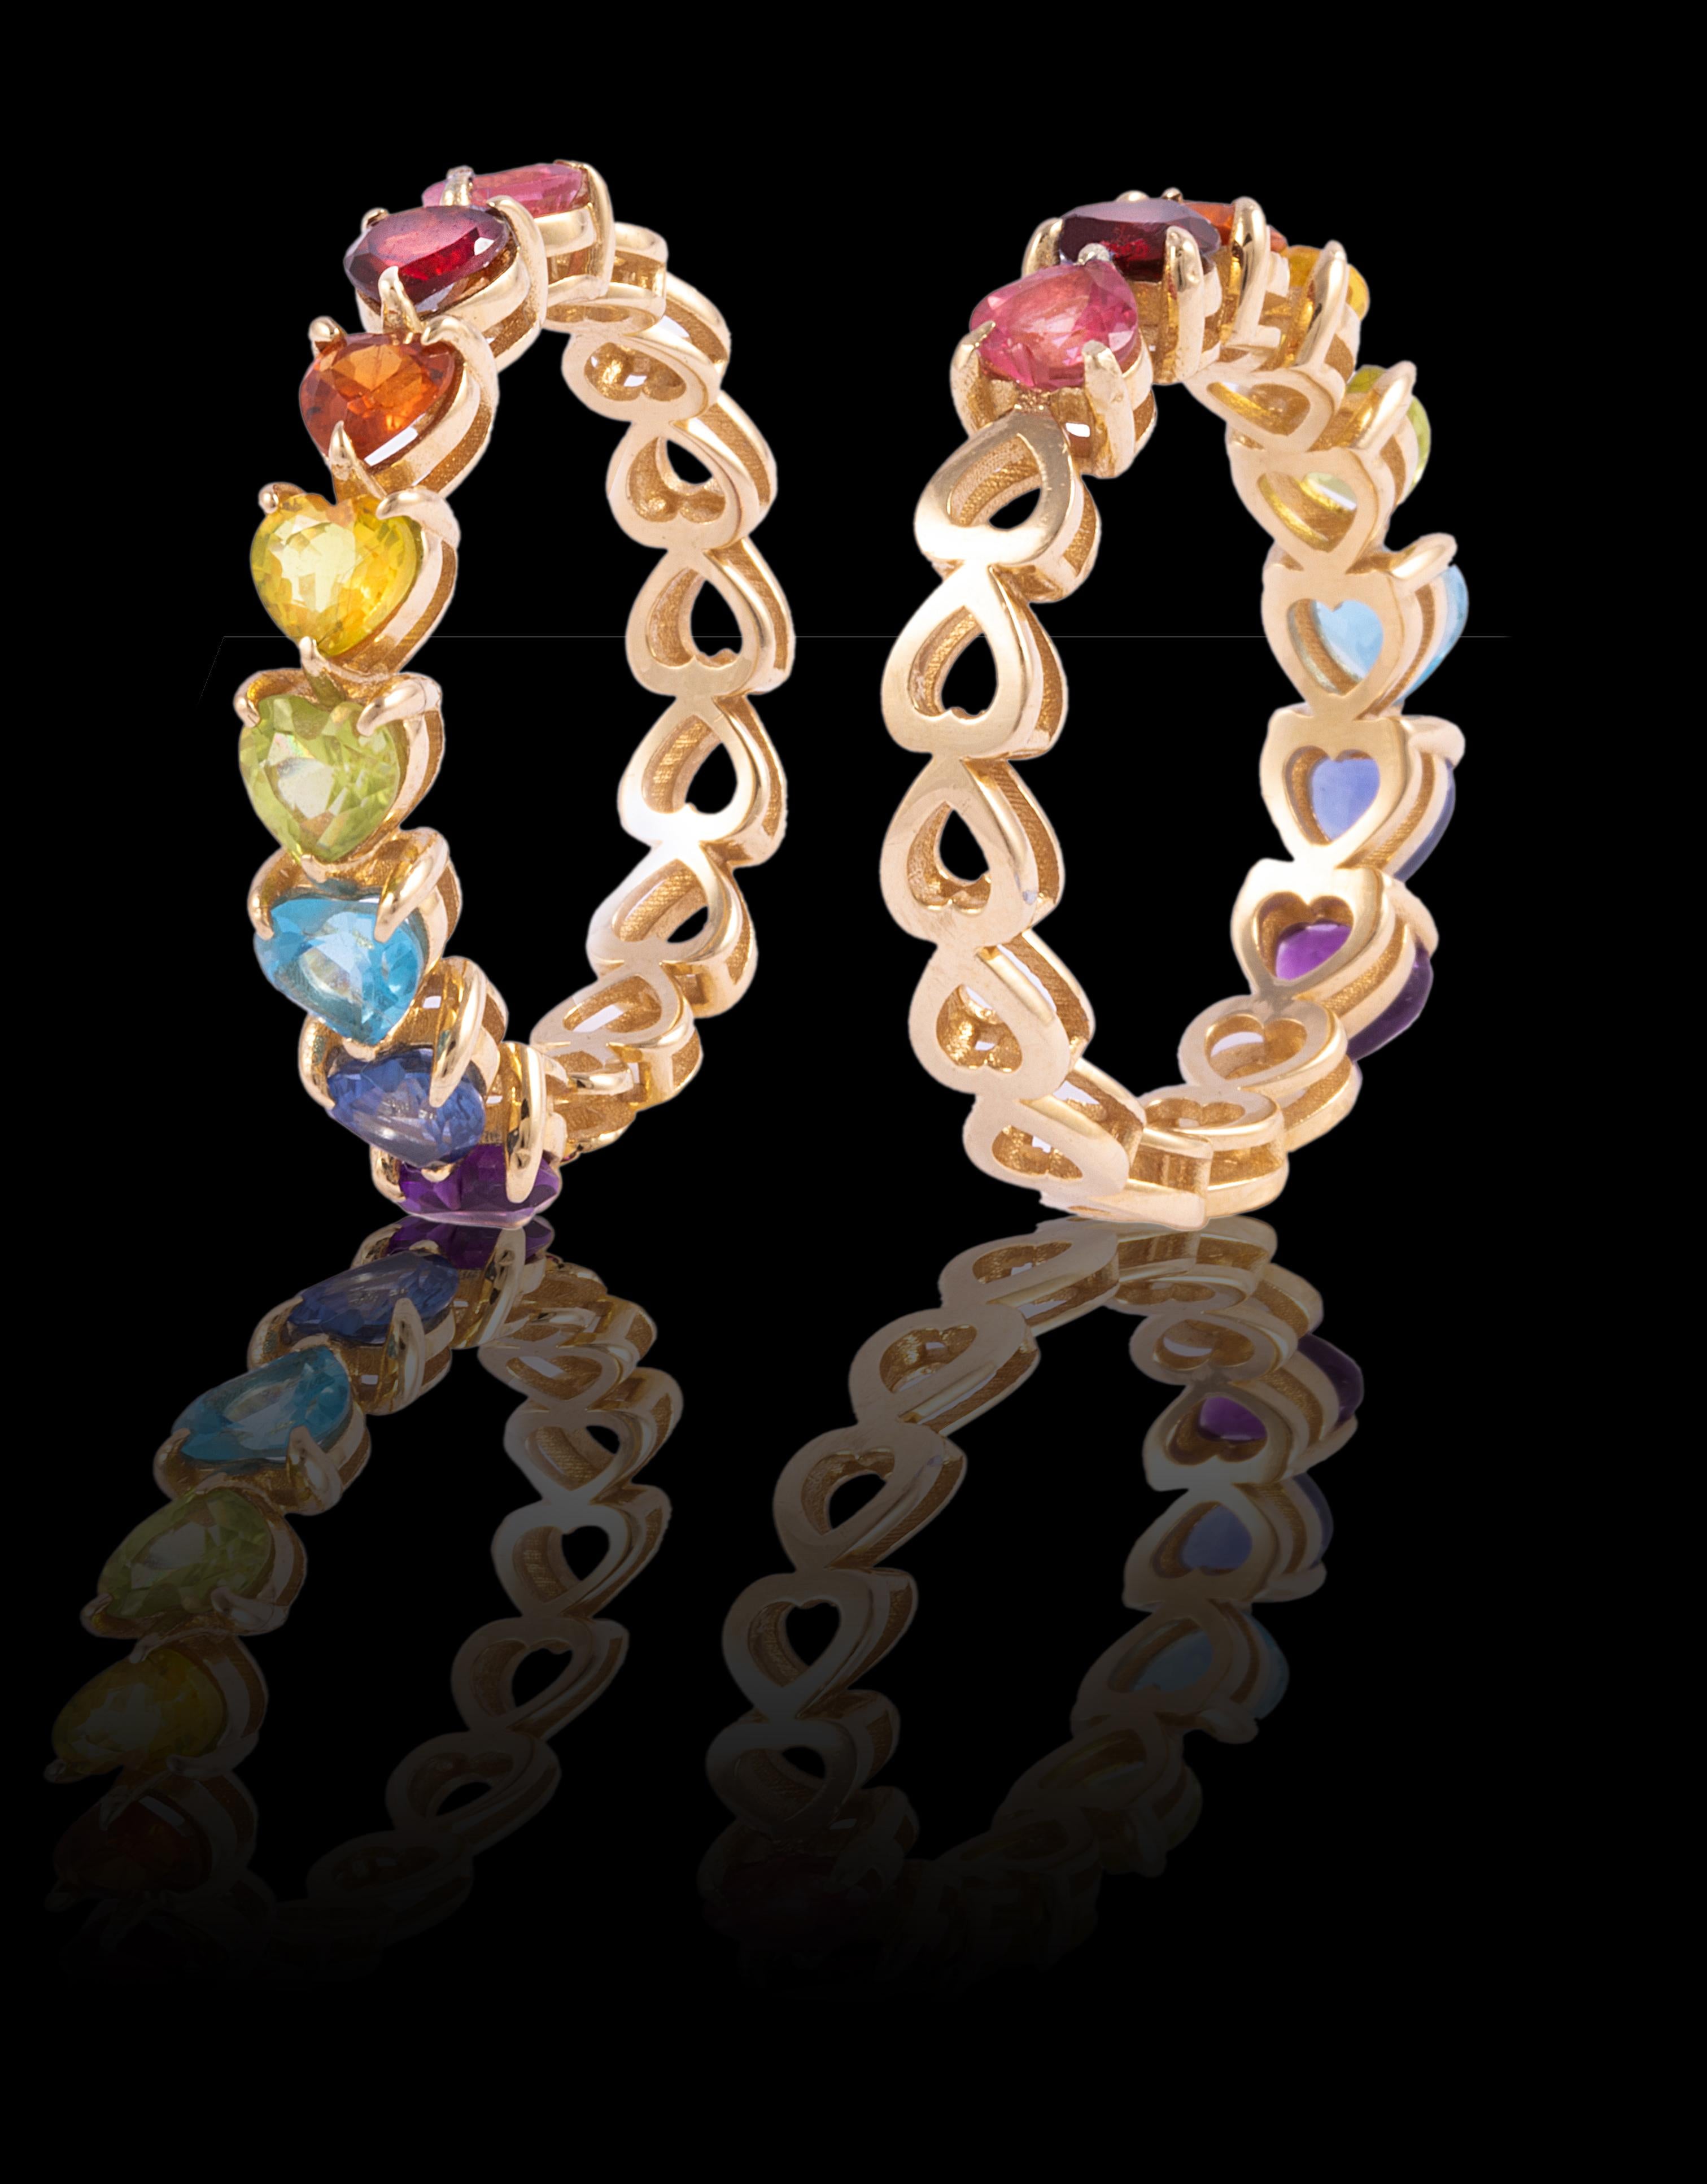 As the first fine jewelry piece from the house of Mordekai, we are celebrating one of our iconic themes, the Rainbow. This unique ring is made of 14k gold, and hand-set with the finest hand-selected, colored stones and gems sourced from all over the